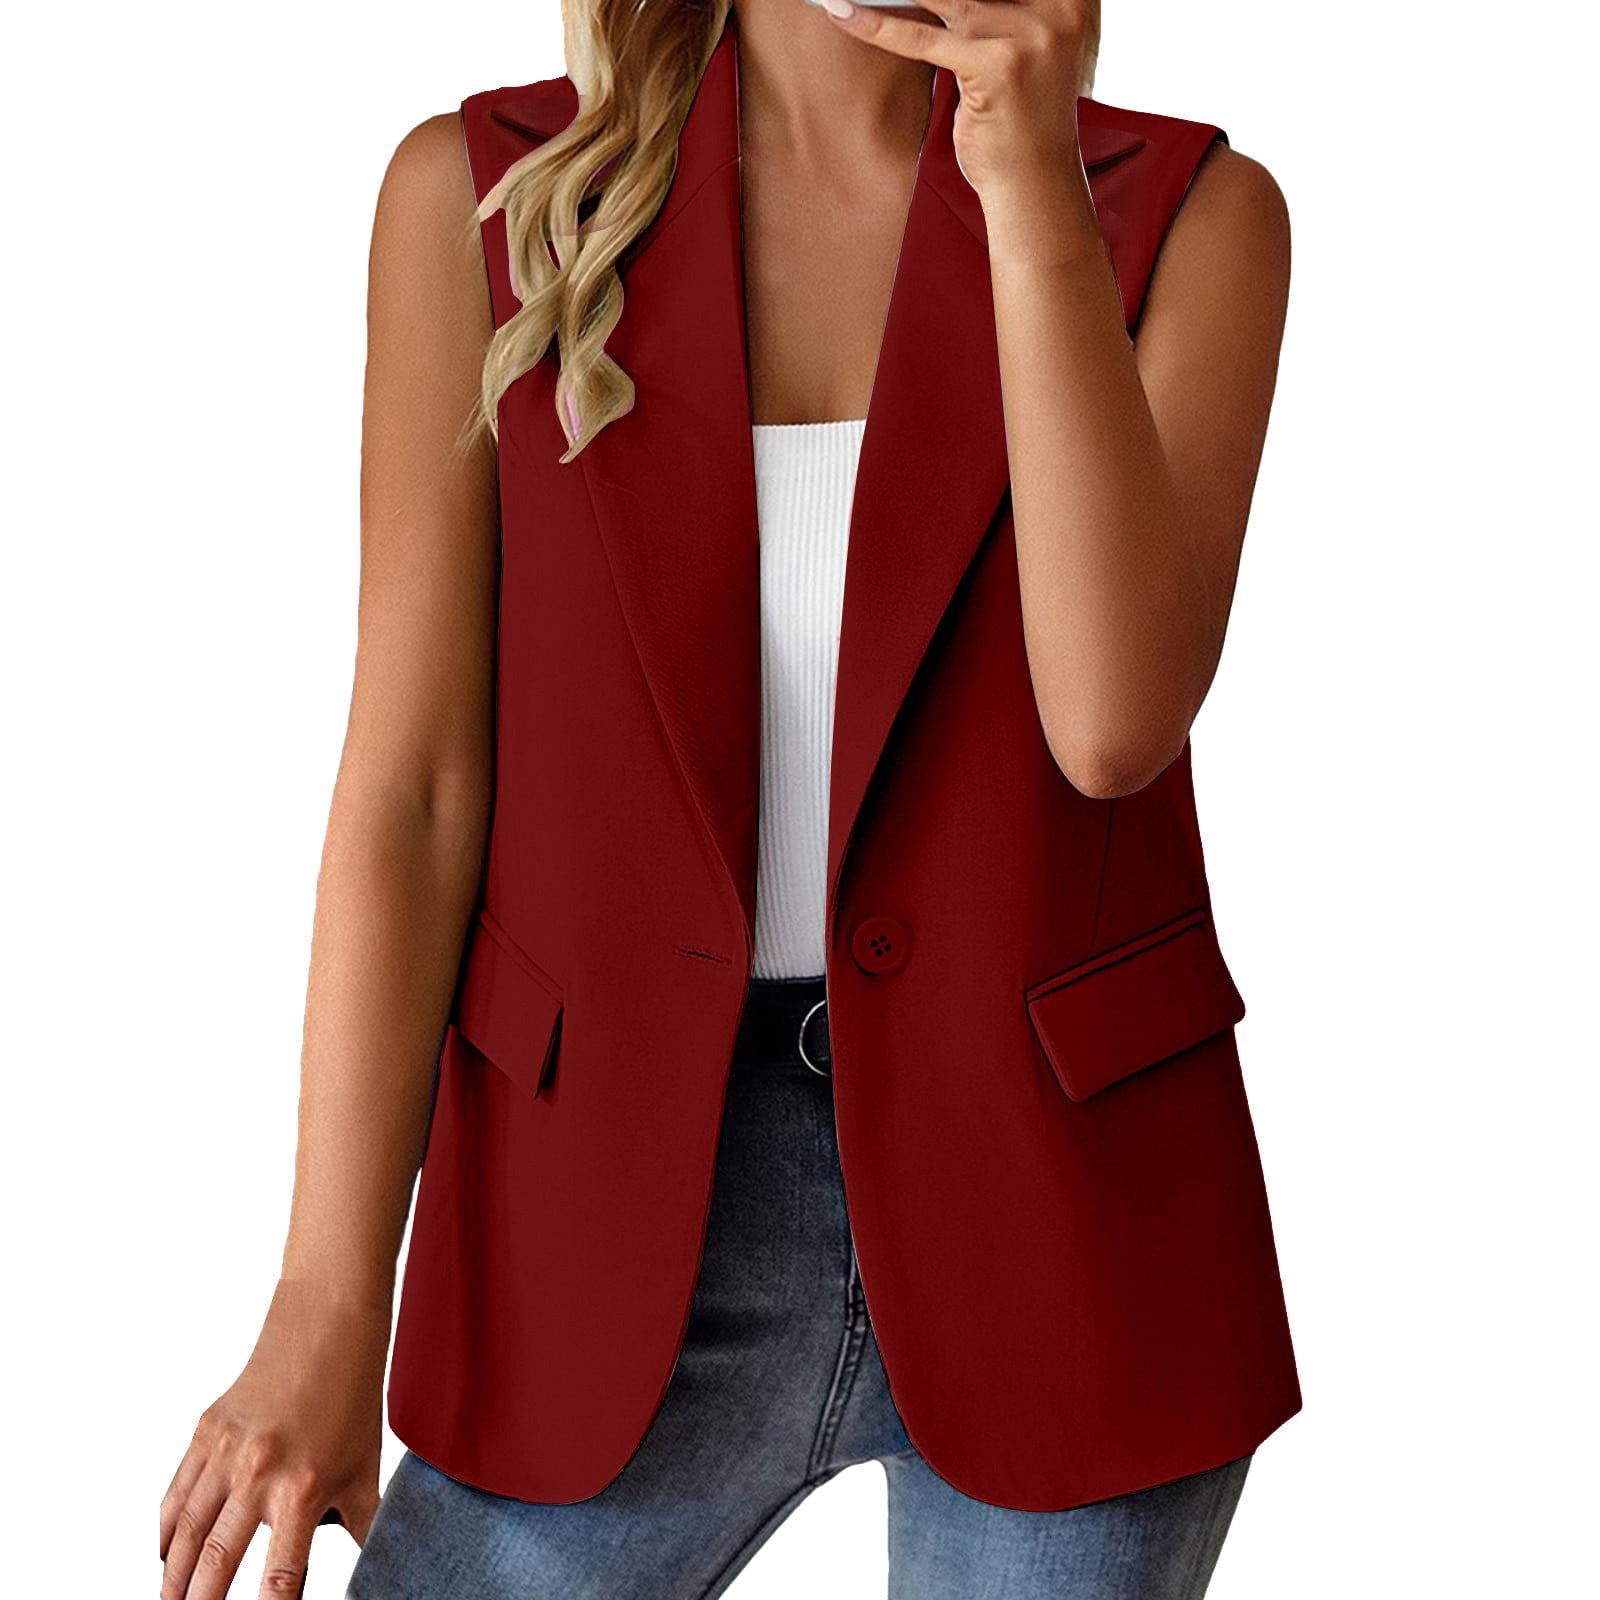 PMUYBHF Workout Sets for Women with Pockets Fashion Casual Wear Cardigan  Button Pants Pocket Women S Sets Business Suits for Women office Suit 90S